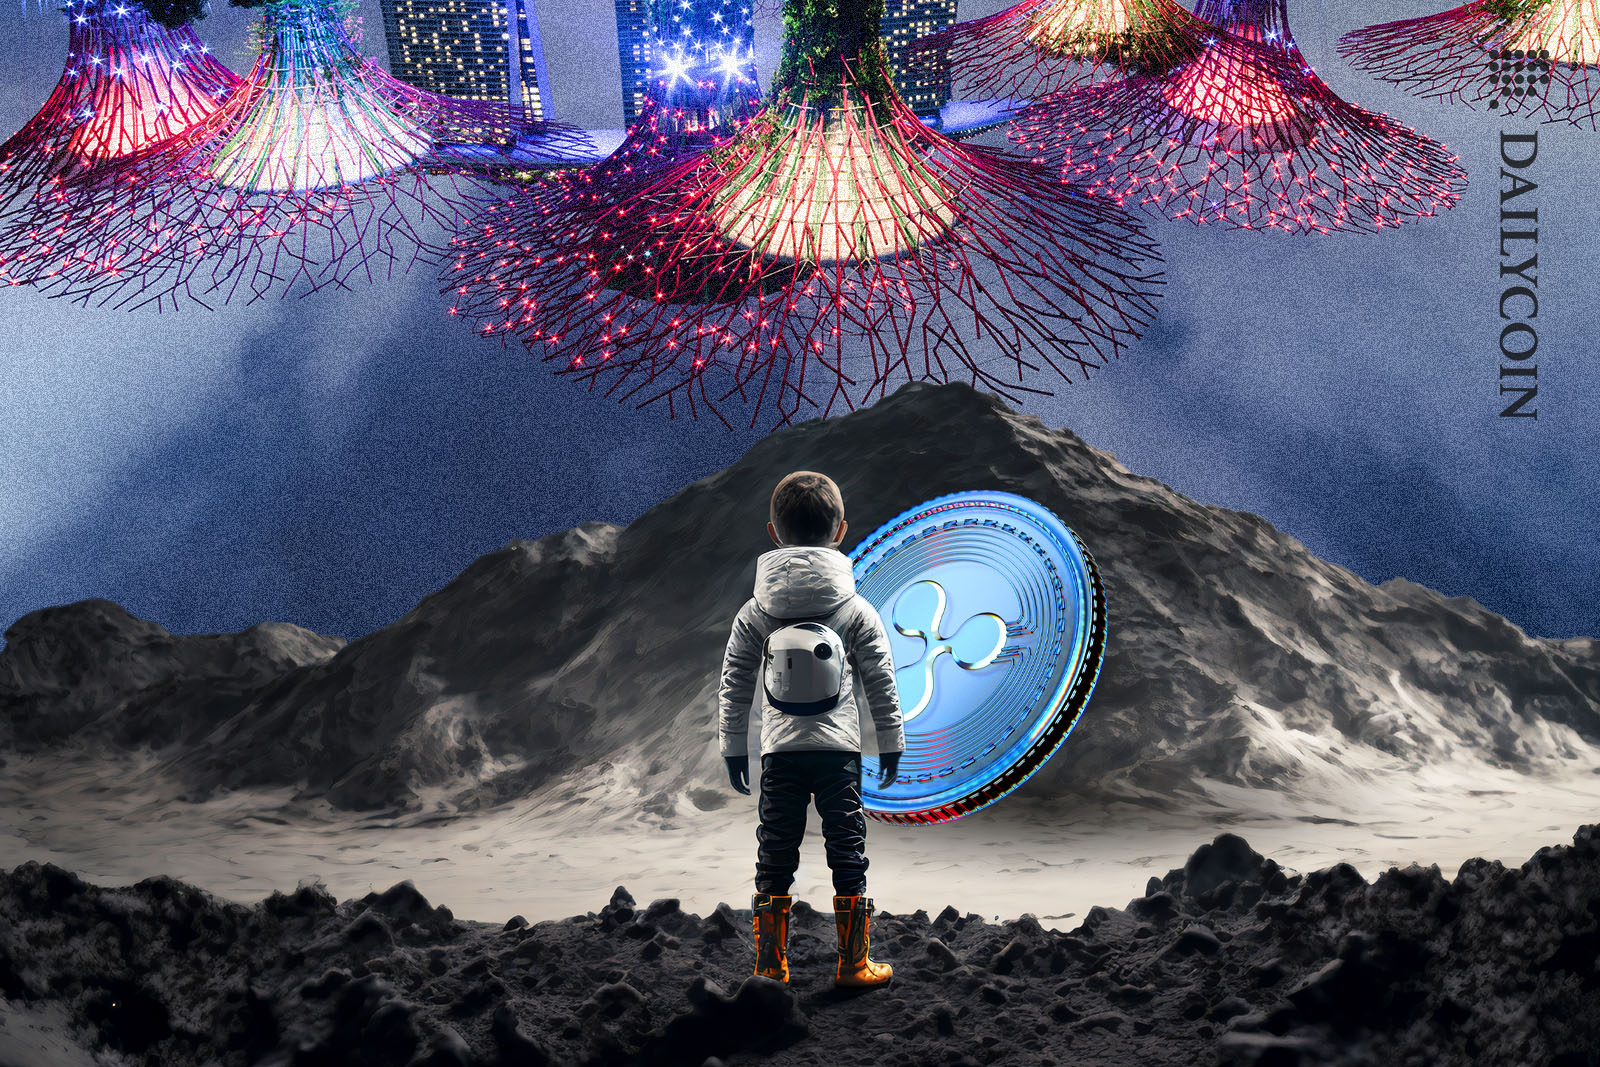 A kid is looking at a Ripple coin leaned on a mountain with a Singapore skyline, upside down.